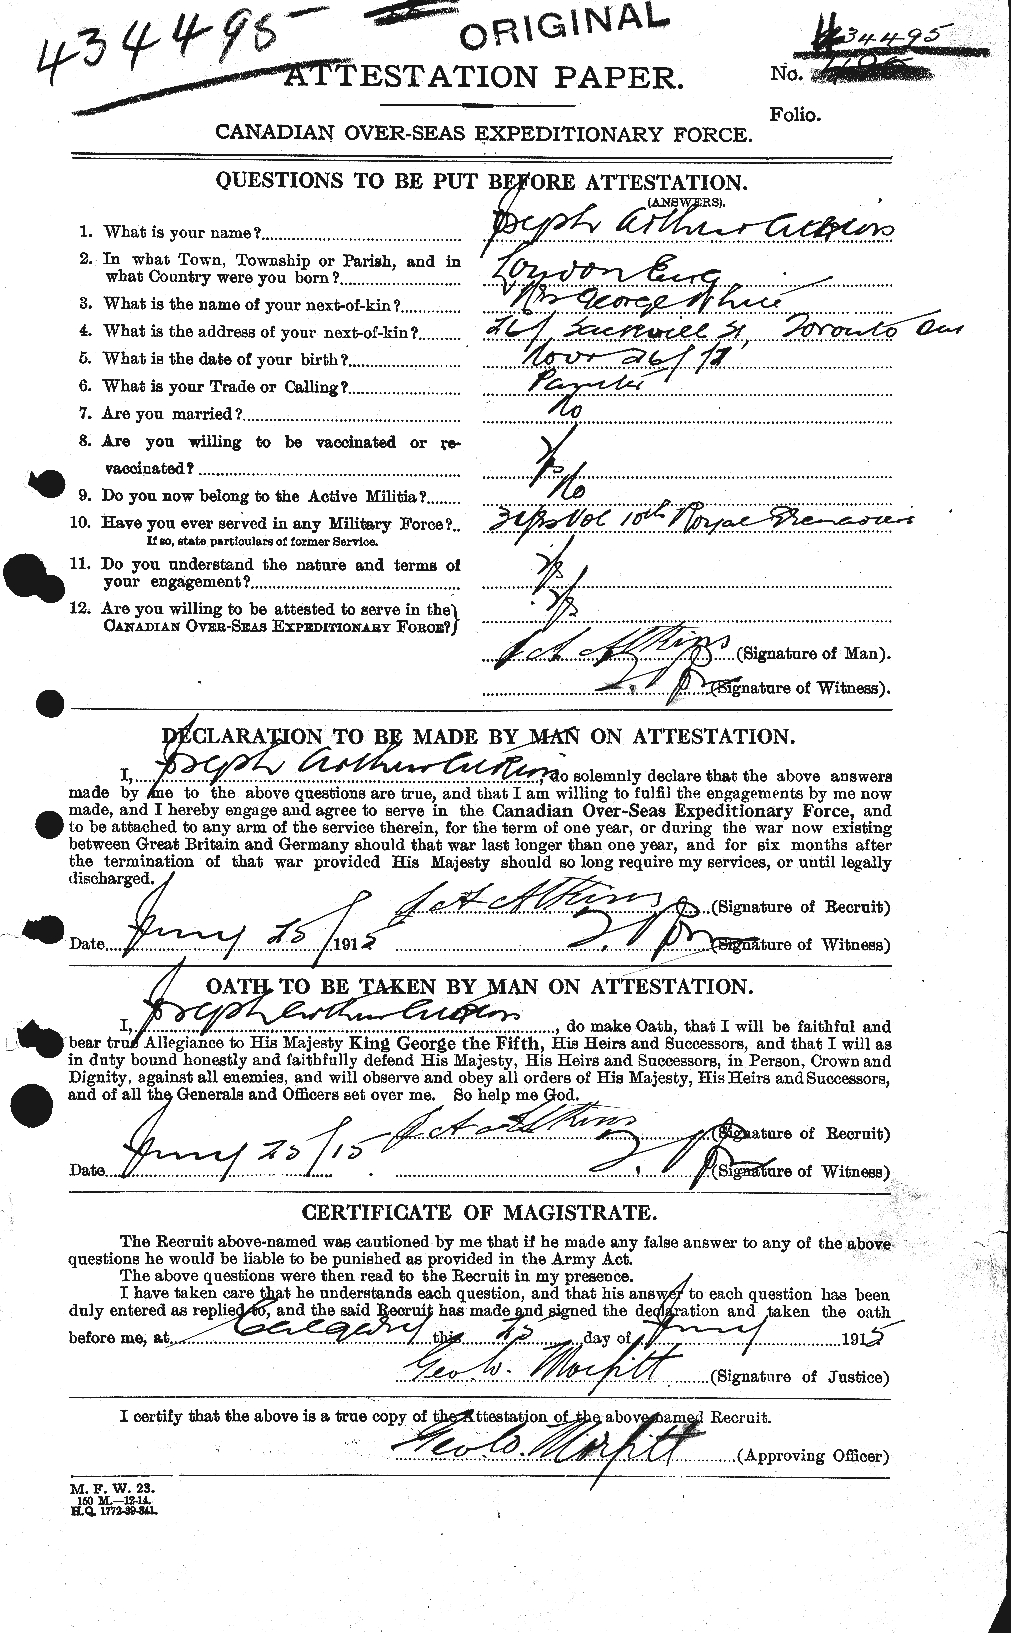 Personnel Records of the First World War - CEF 216810a